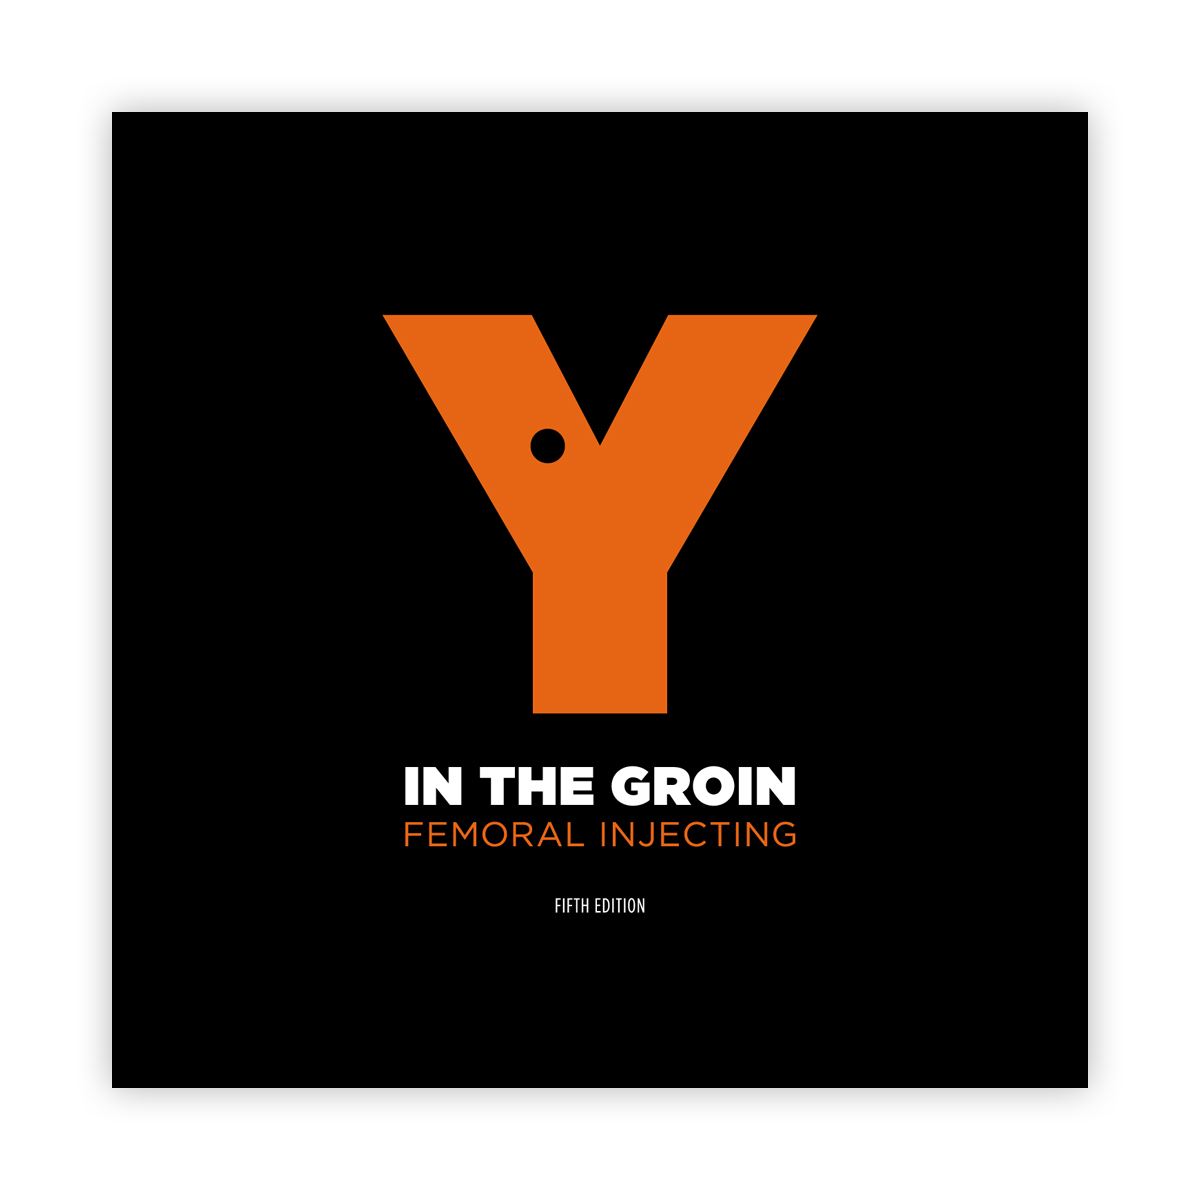 'In the groin' booklet